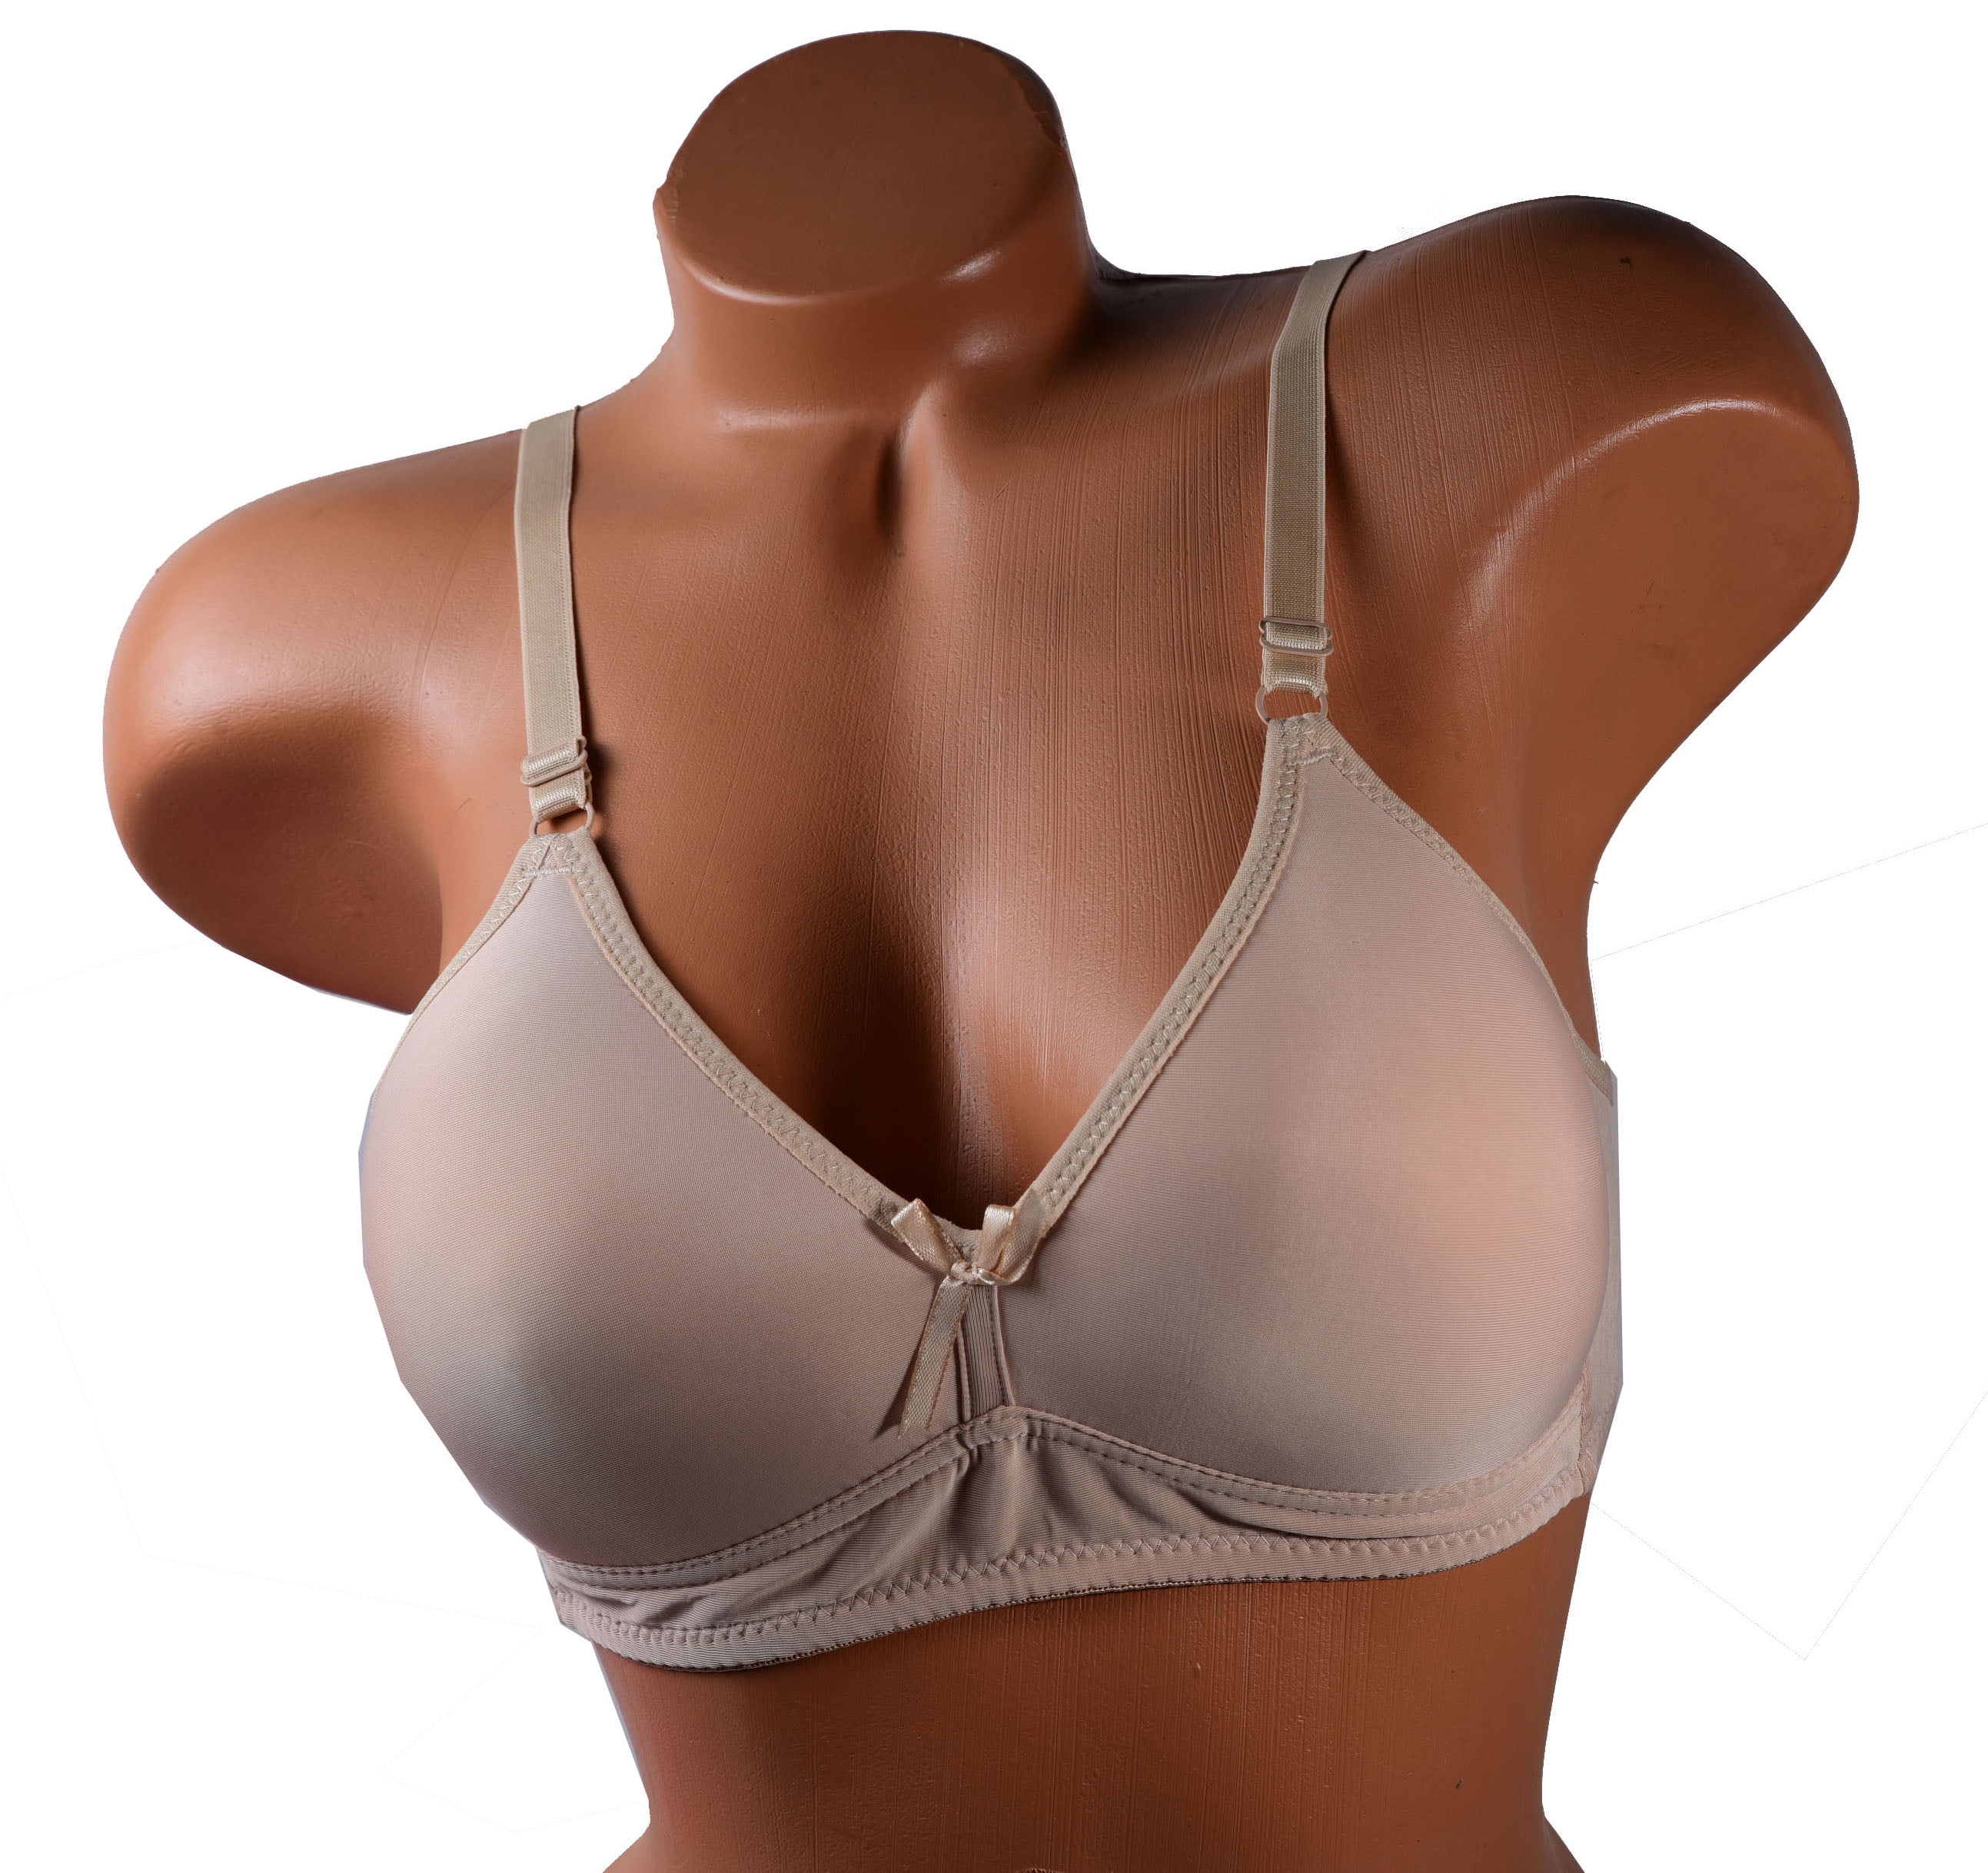 Pink Women Bras 6 pack of Basic No Wire Free Wireless Bra B cup C cup (6647)